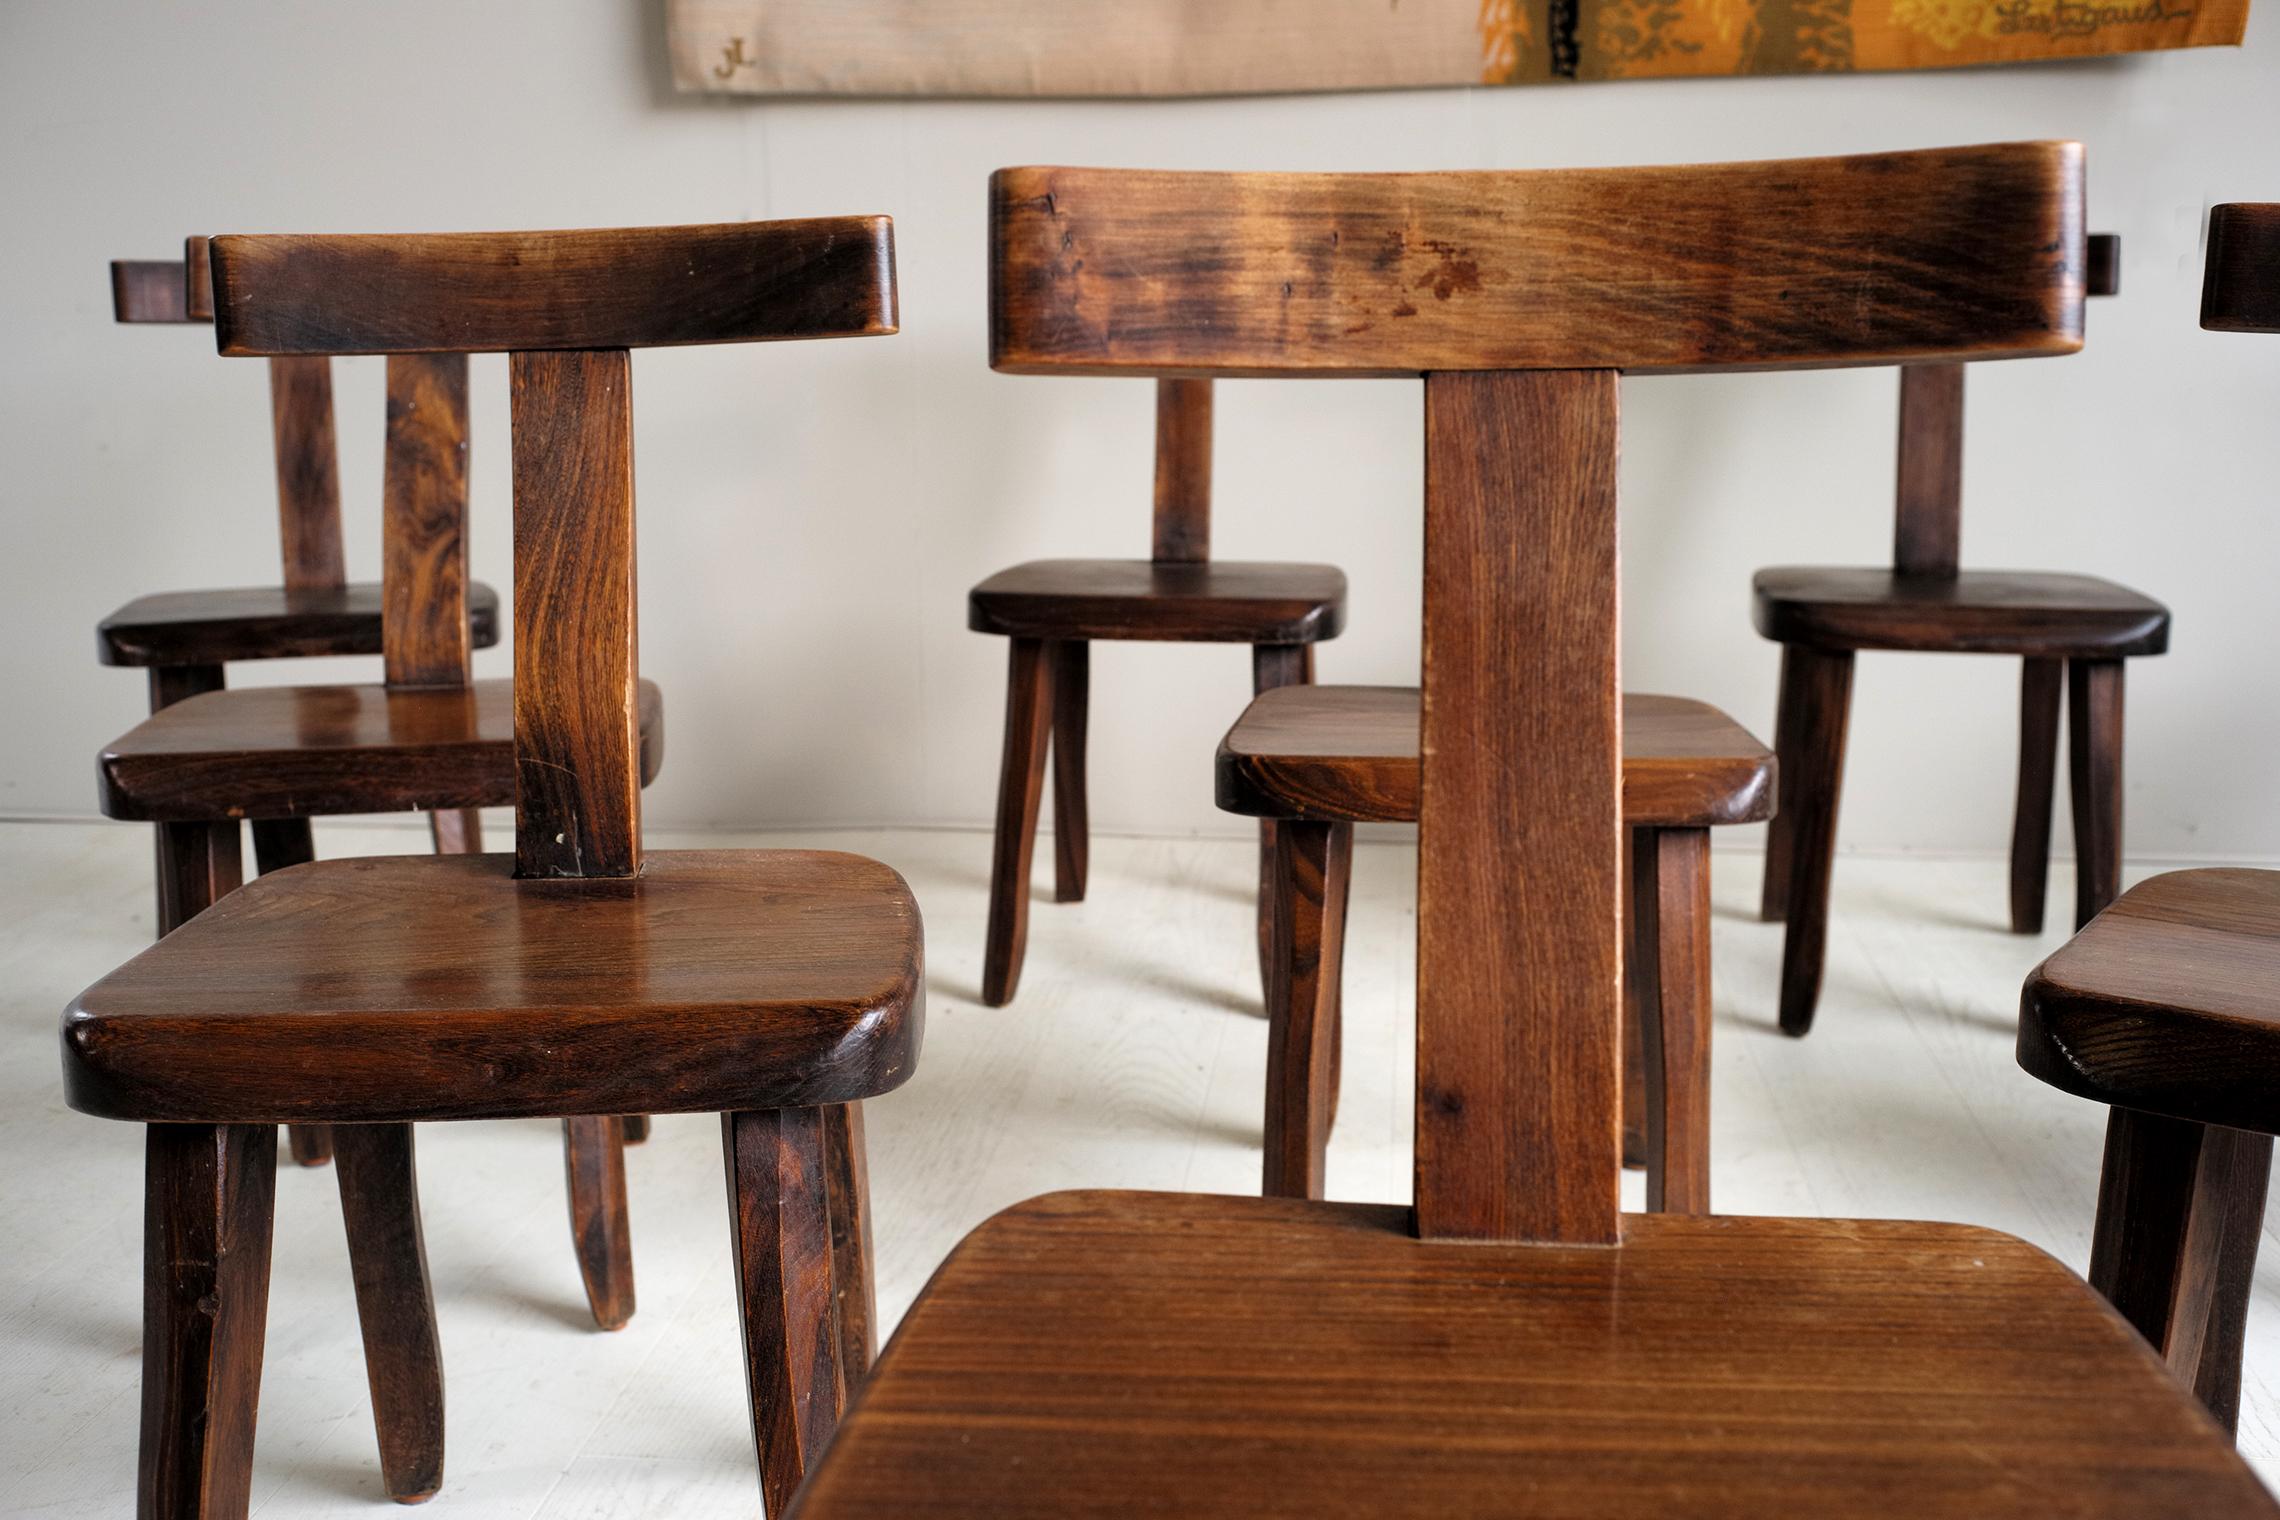 Olavi Hanninen, beautiful set of 10 T-chairs in solid elm with dark patina, edition Mikko Nupporen, Finland, 1960. Drawing from the register of traditional Finnish furniture, Olavi Hanninen uses the thickness of the elm by softening the line with